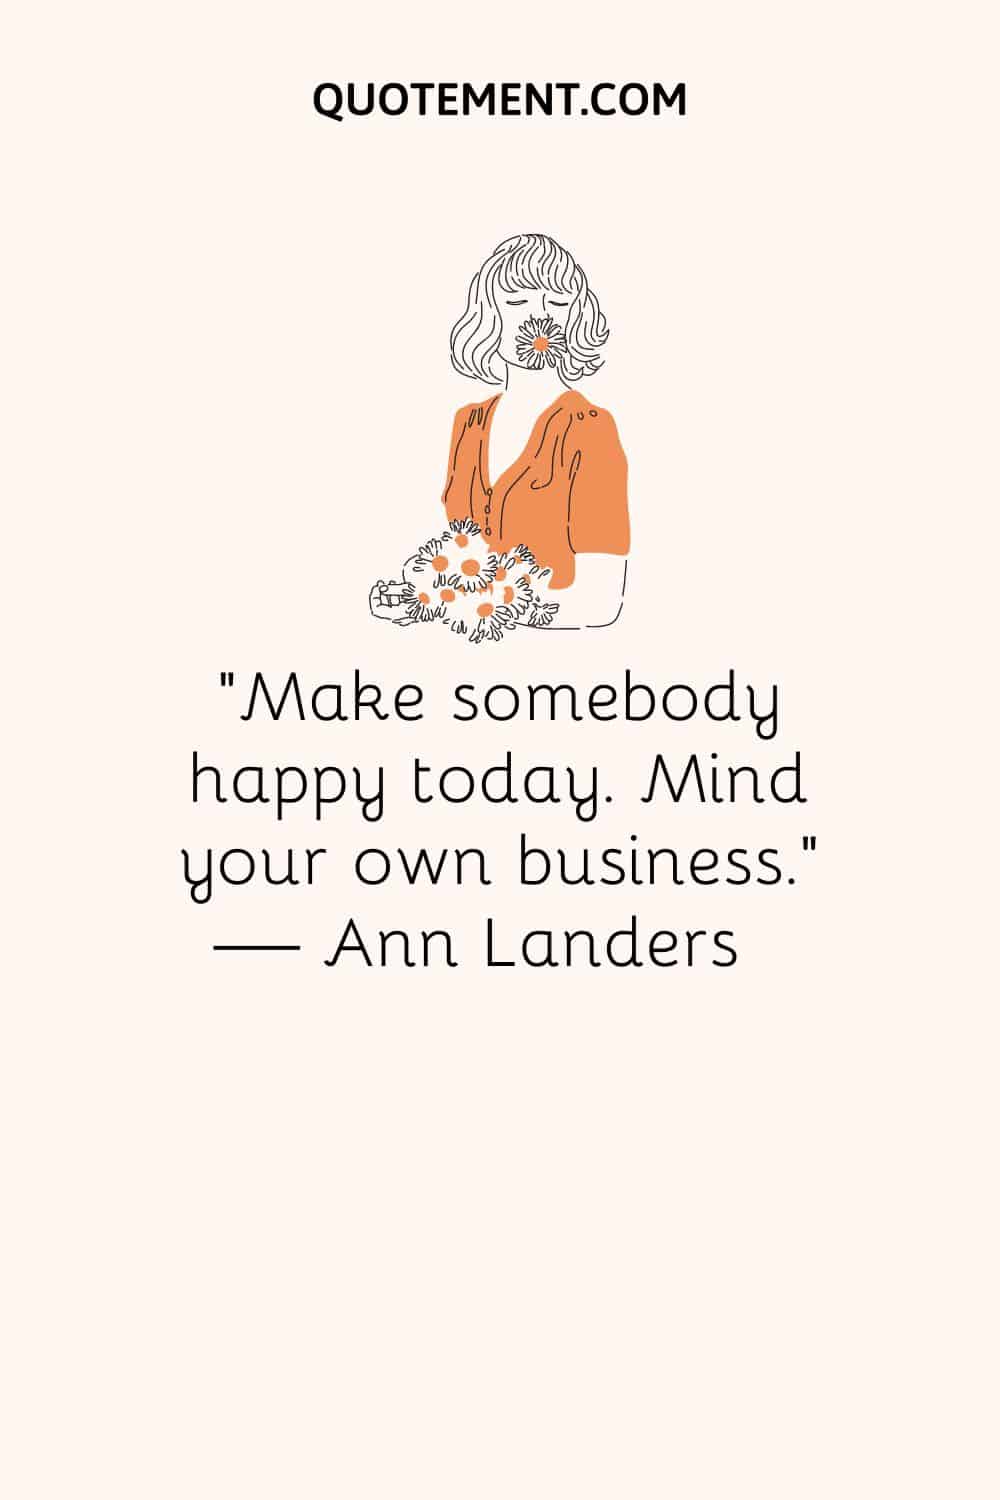 Make somebody happy today. Mind your own business